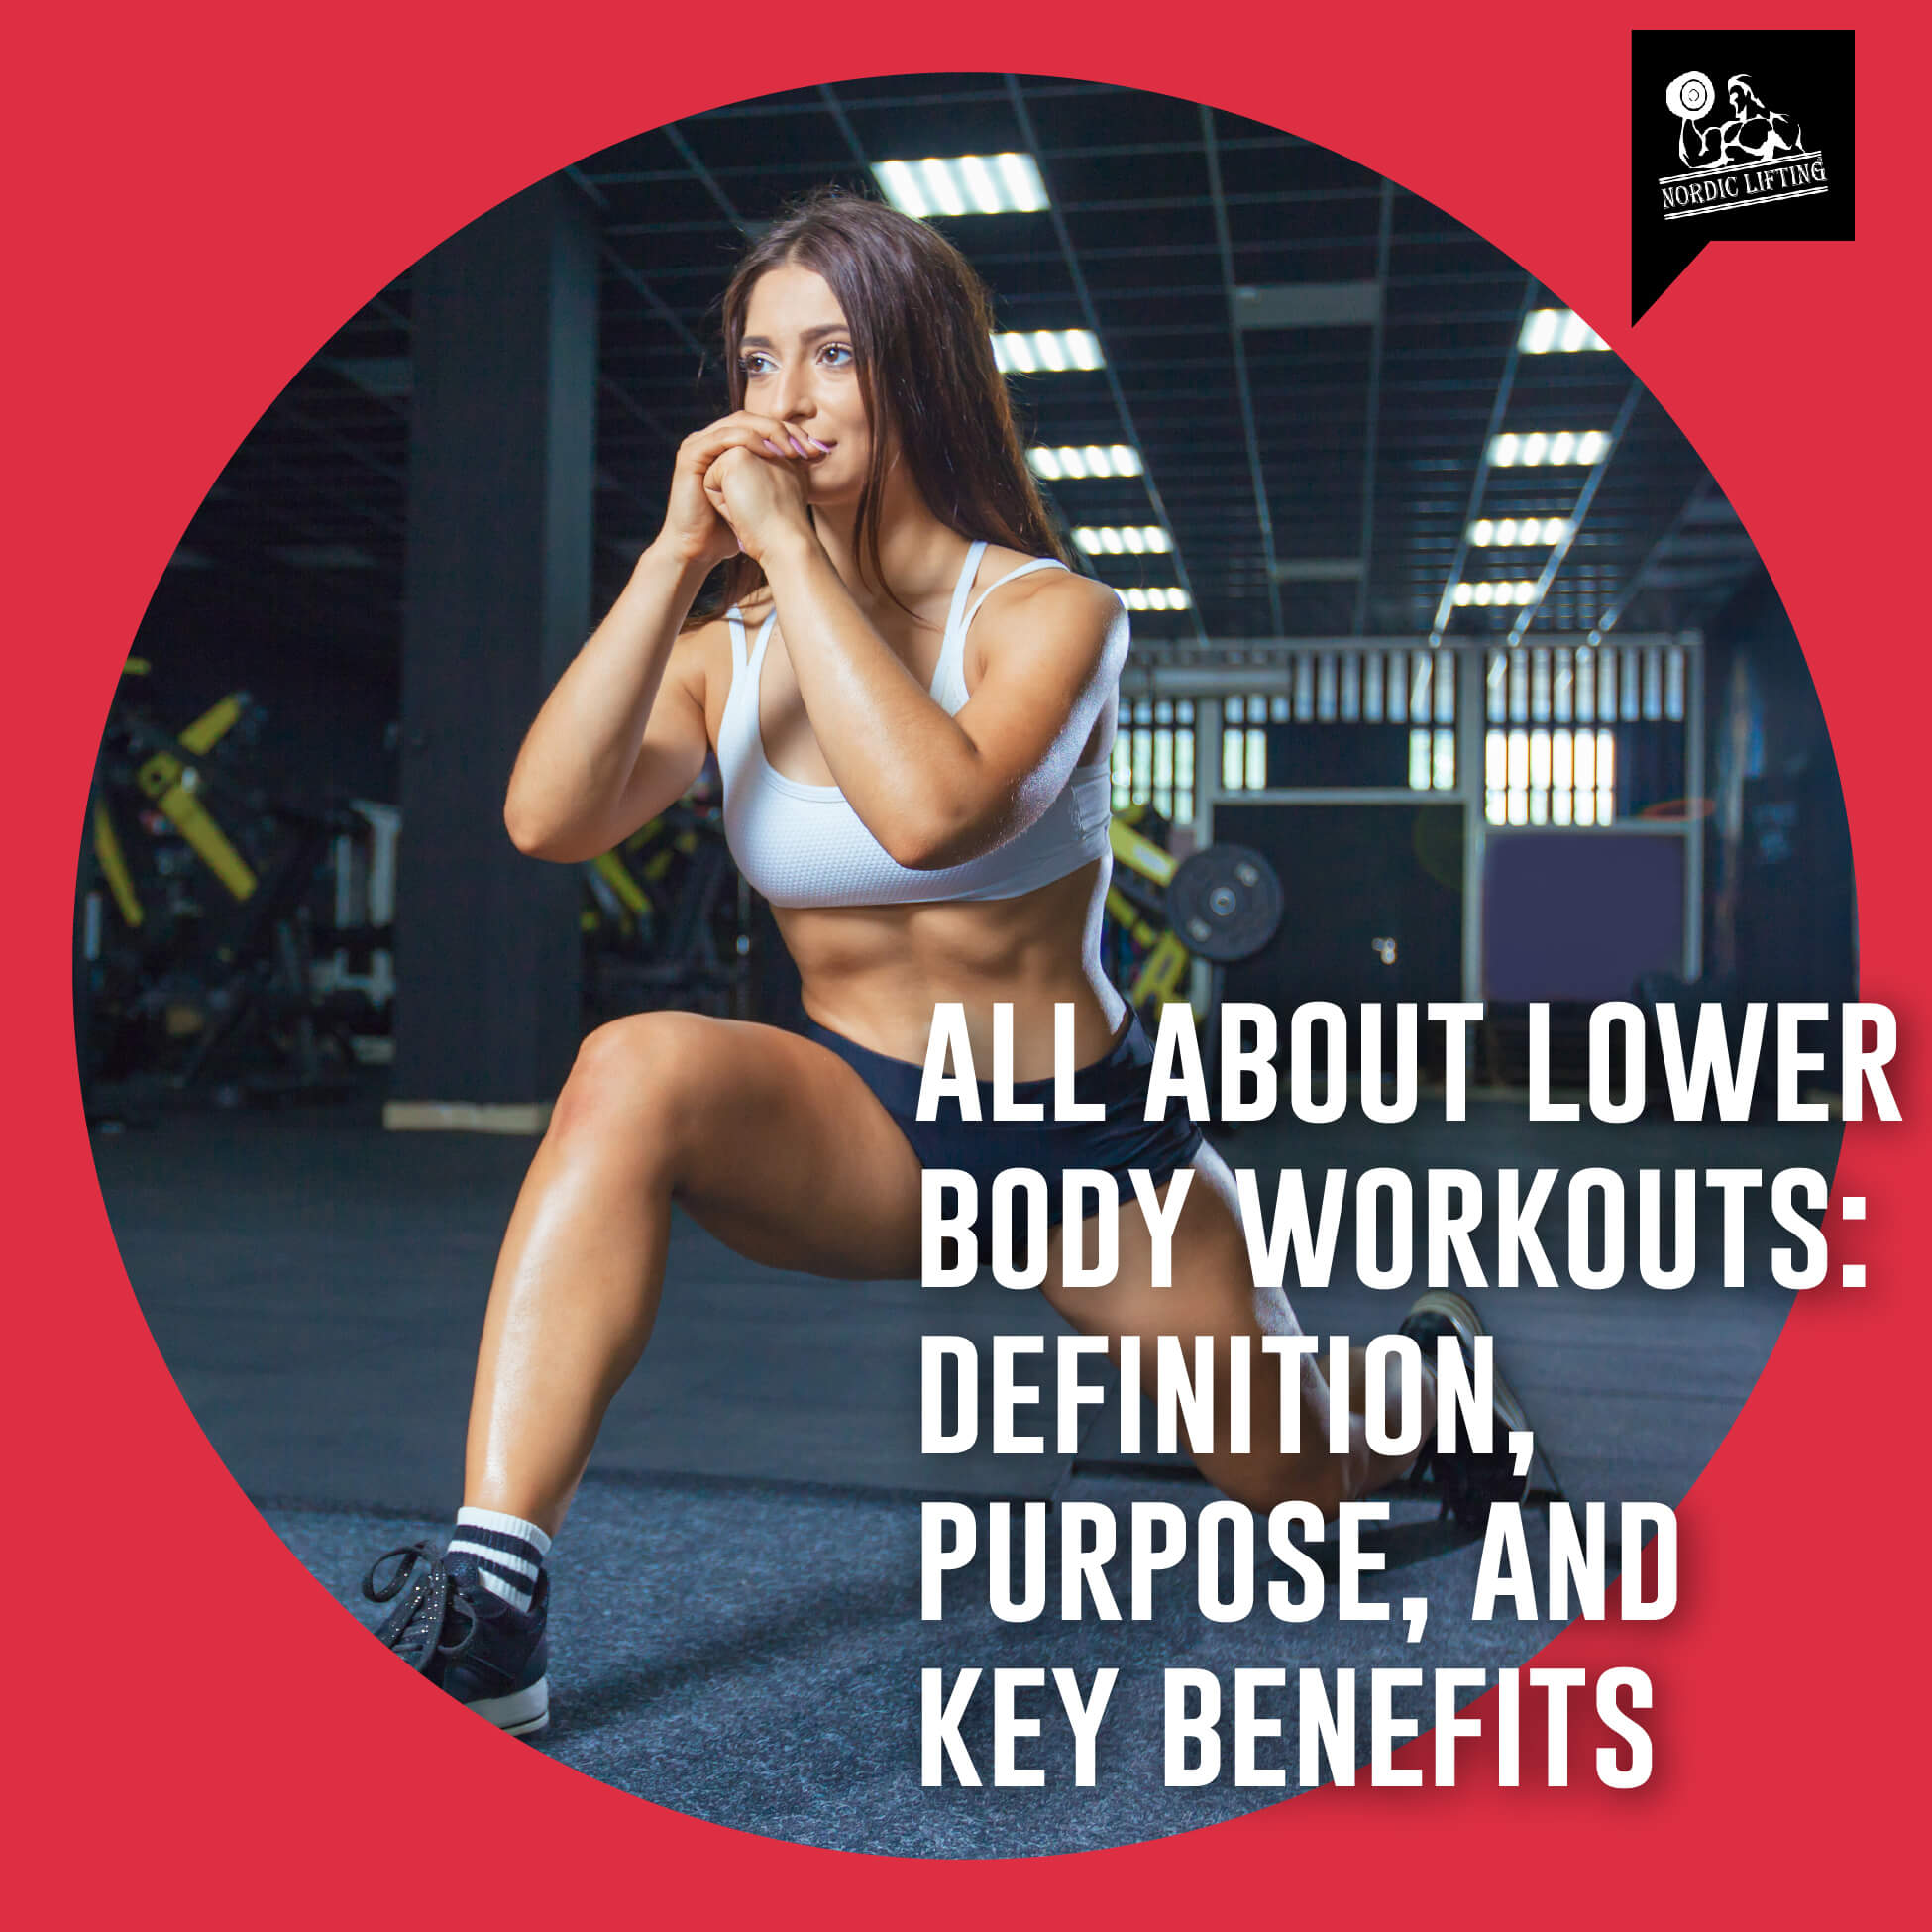 All About Lower Body Workouts: Definition, Purpose, and Key